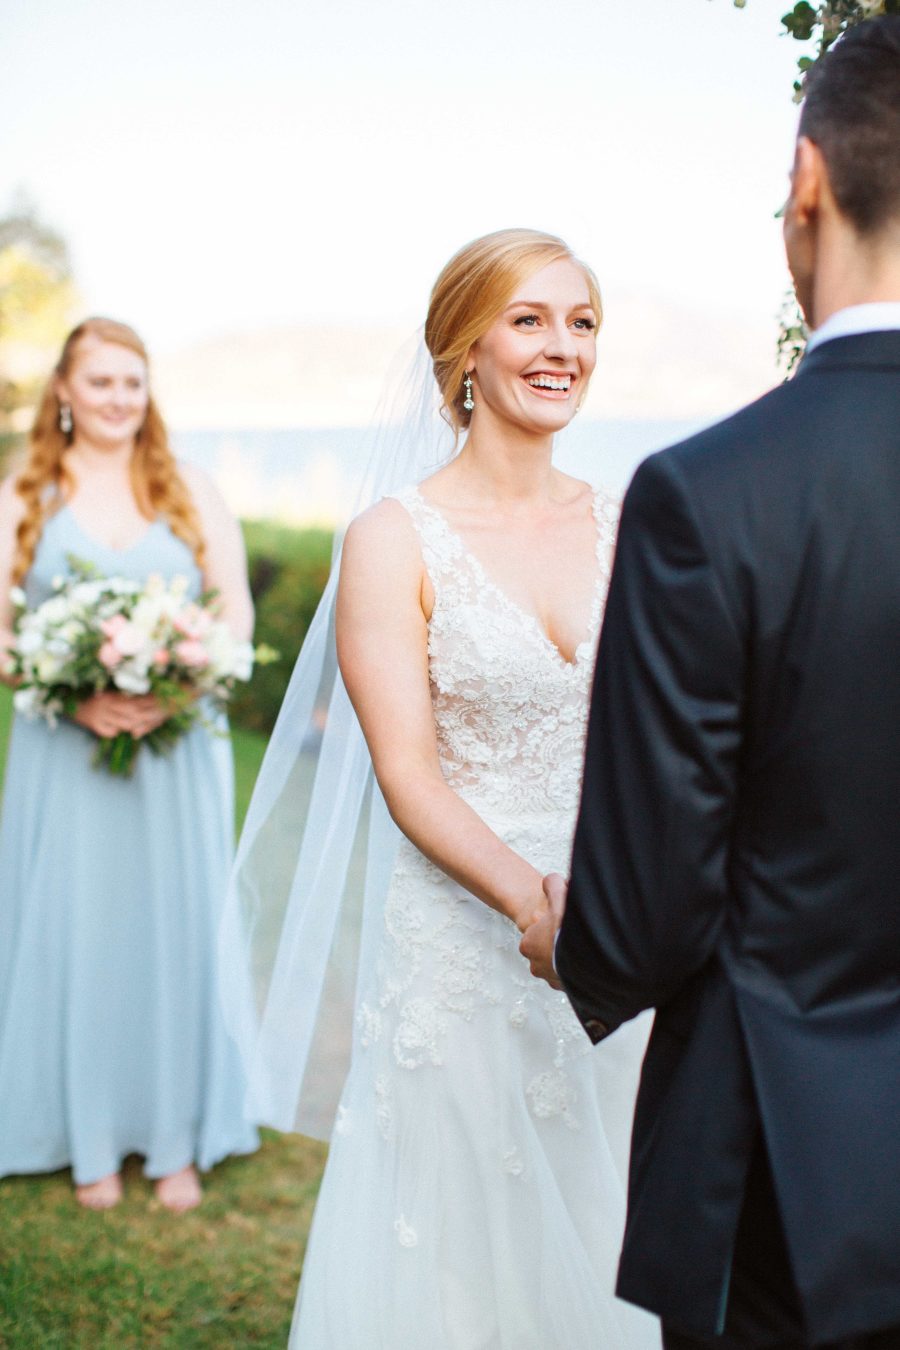 The bridesmaids were wearing light blue maxi dresses and statement earrings